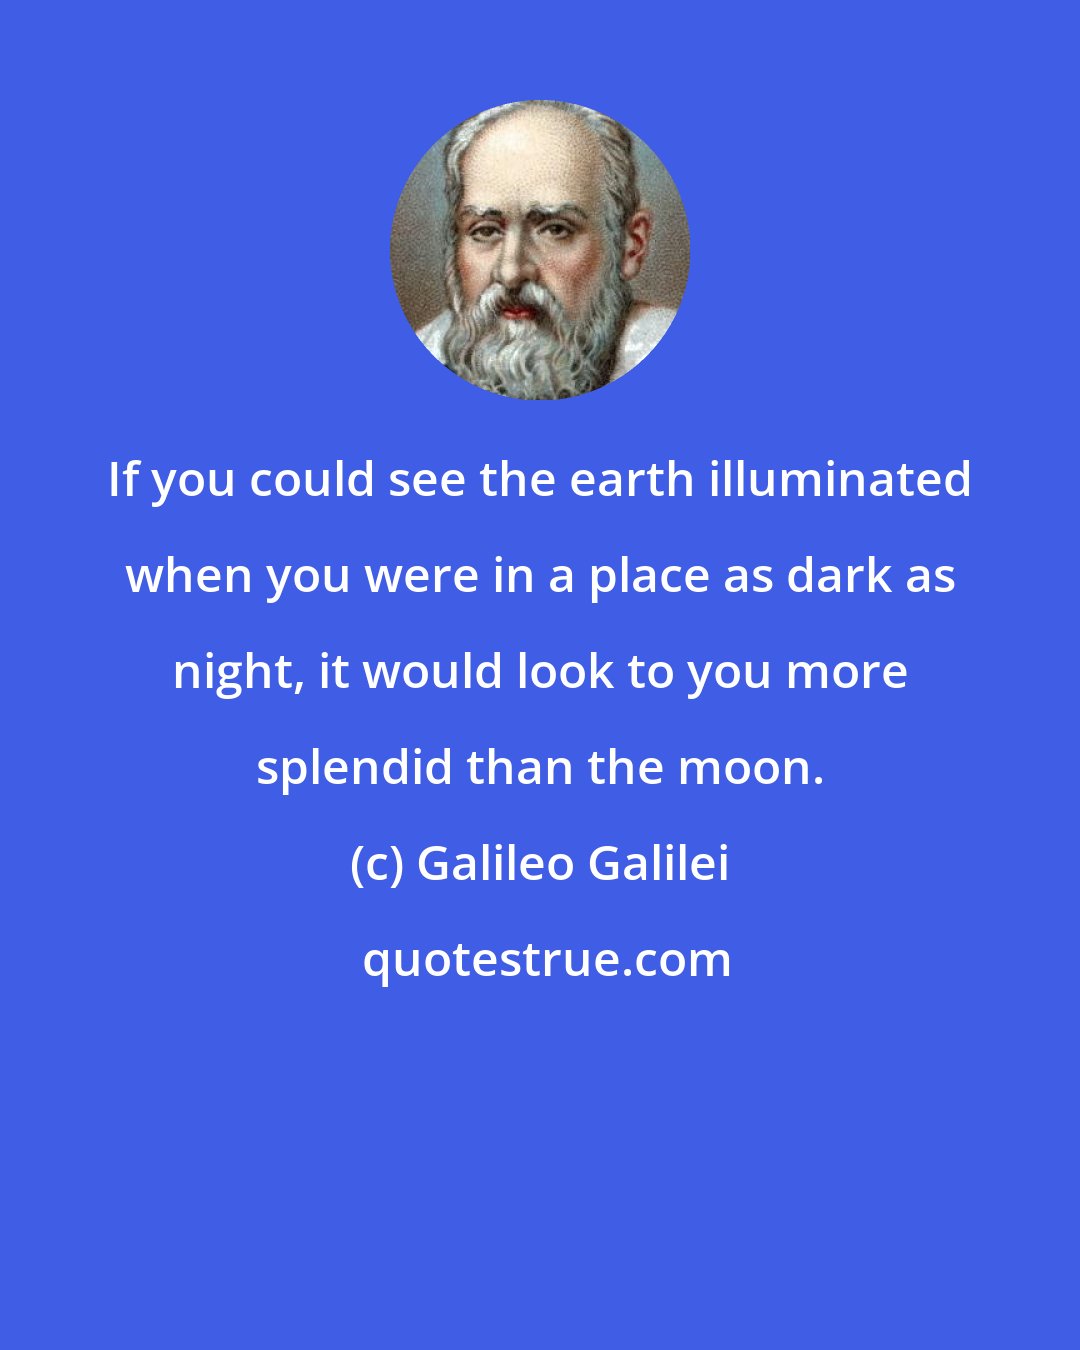 Galileo Galilei: If you could see the earth illuminated when you were in a place as dark as night, it would look to you more splendid than the moon.